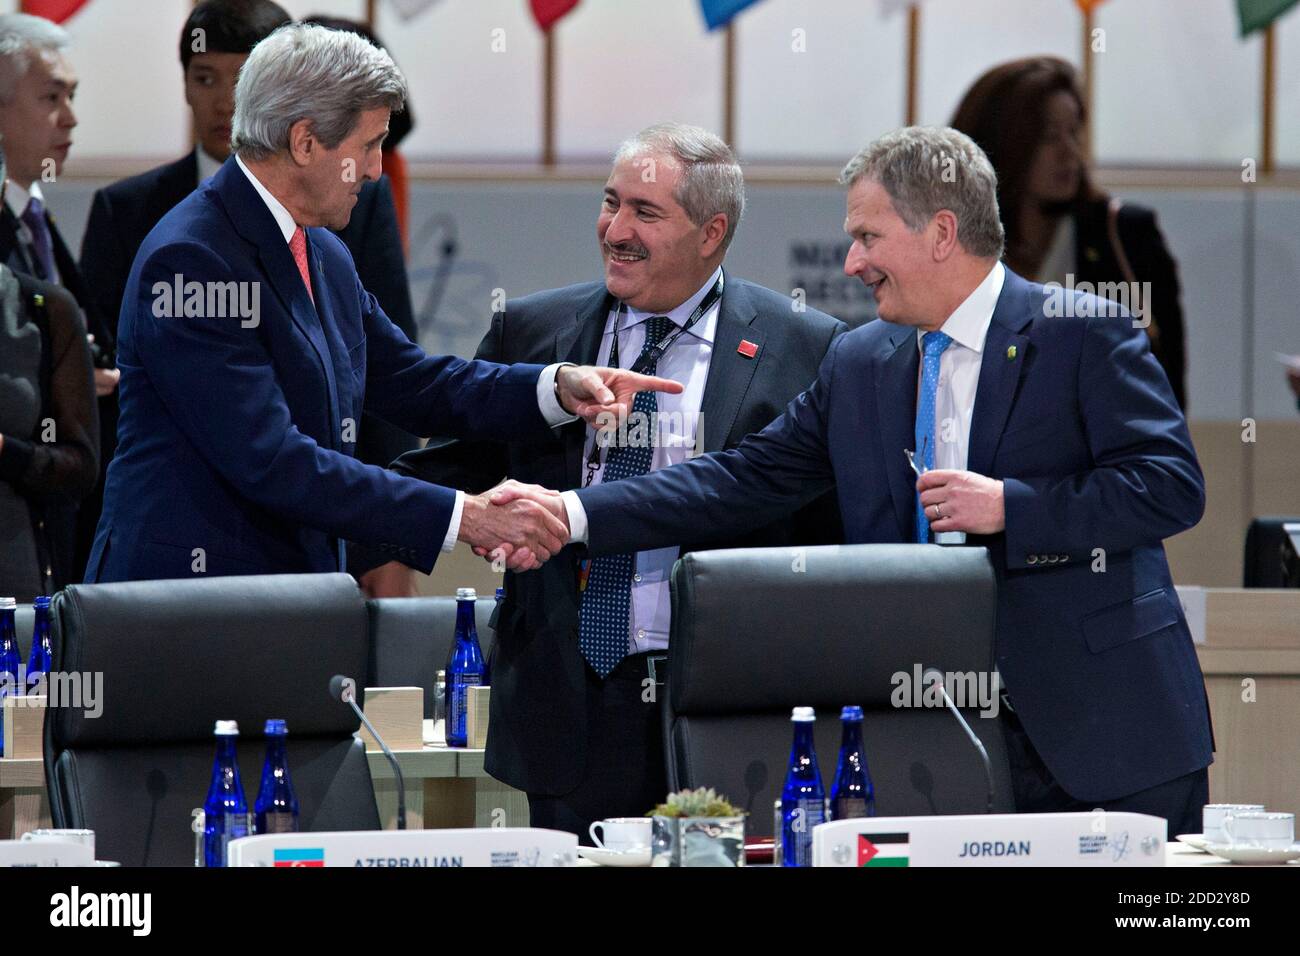 United States Secretary of State John Kerry, left, talks to Sauli Niinisto, Finland's president, right, and Nasser Judeh, Jordan's minister of foreign affairs, center, during a closing session at the Nuclear Security Summit in Washington, DC, U.S., on Friday, April 1, 2016. After a spate of terrorist attacks from Europe to Africa, U.S. President Barack Obama is rallying international support during the summit for an effort to keep Islamic State and similar groups from obtaining nuclear material and other weapons of mass destruction. Credit: Andrew Harrer/Pool via CNP | usage worldwide Stock Photo